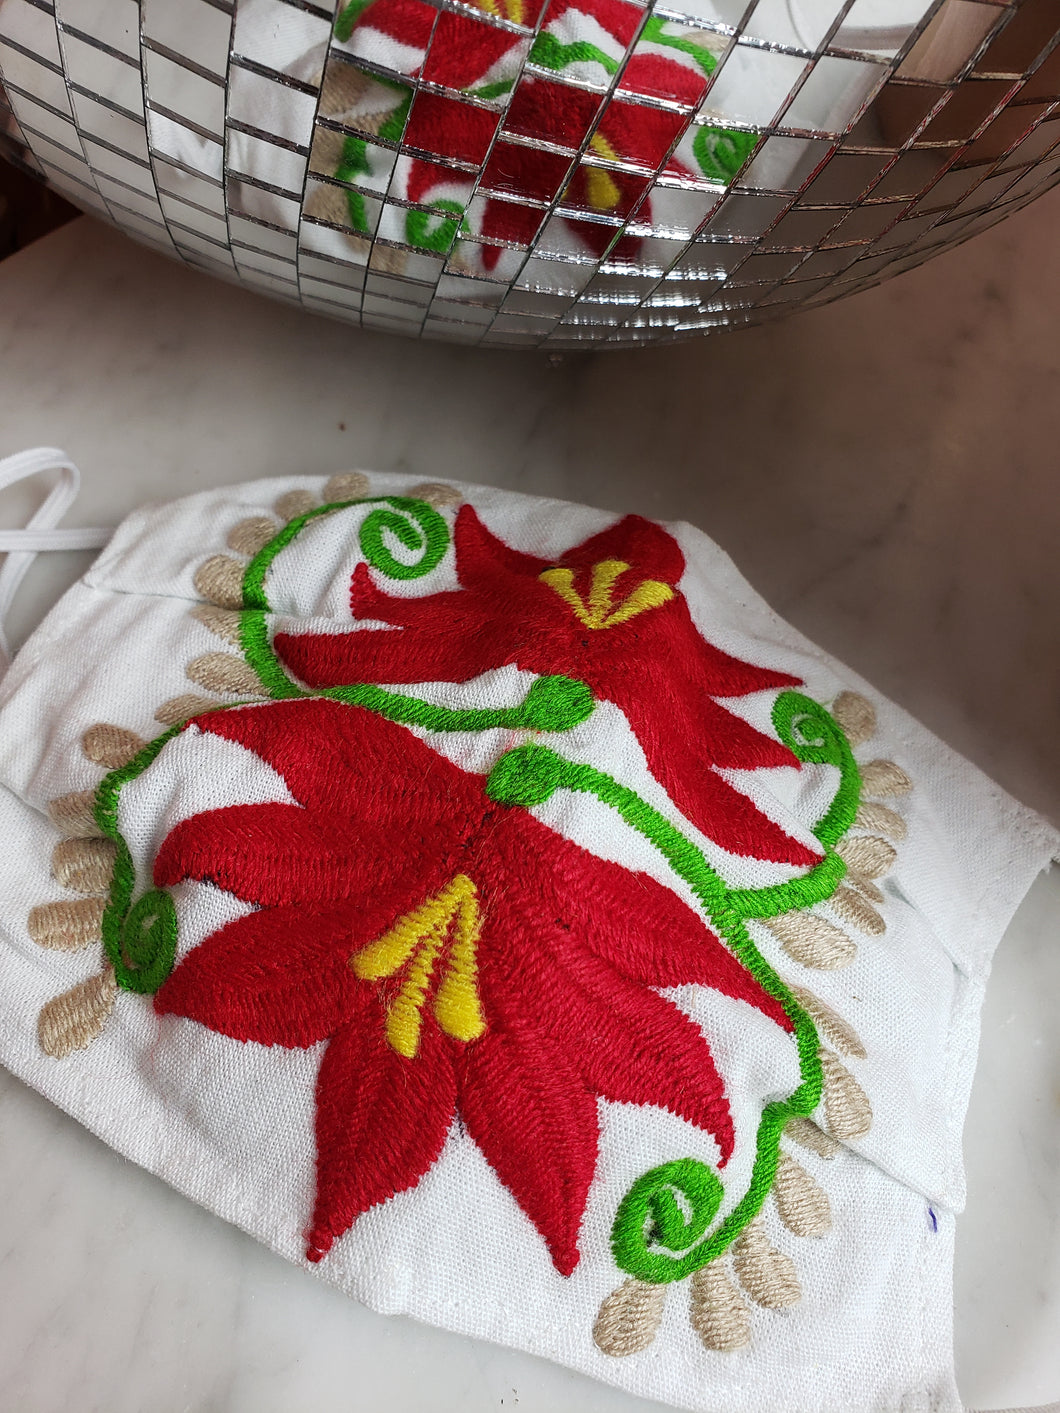 Red & White Floral Embroidery Mask